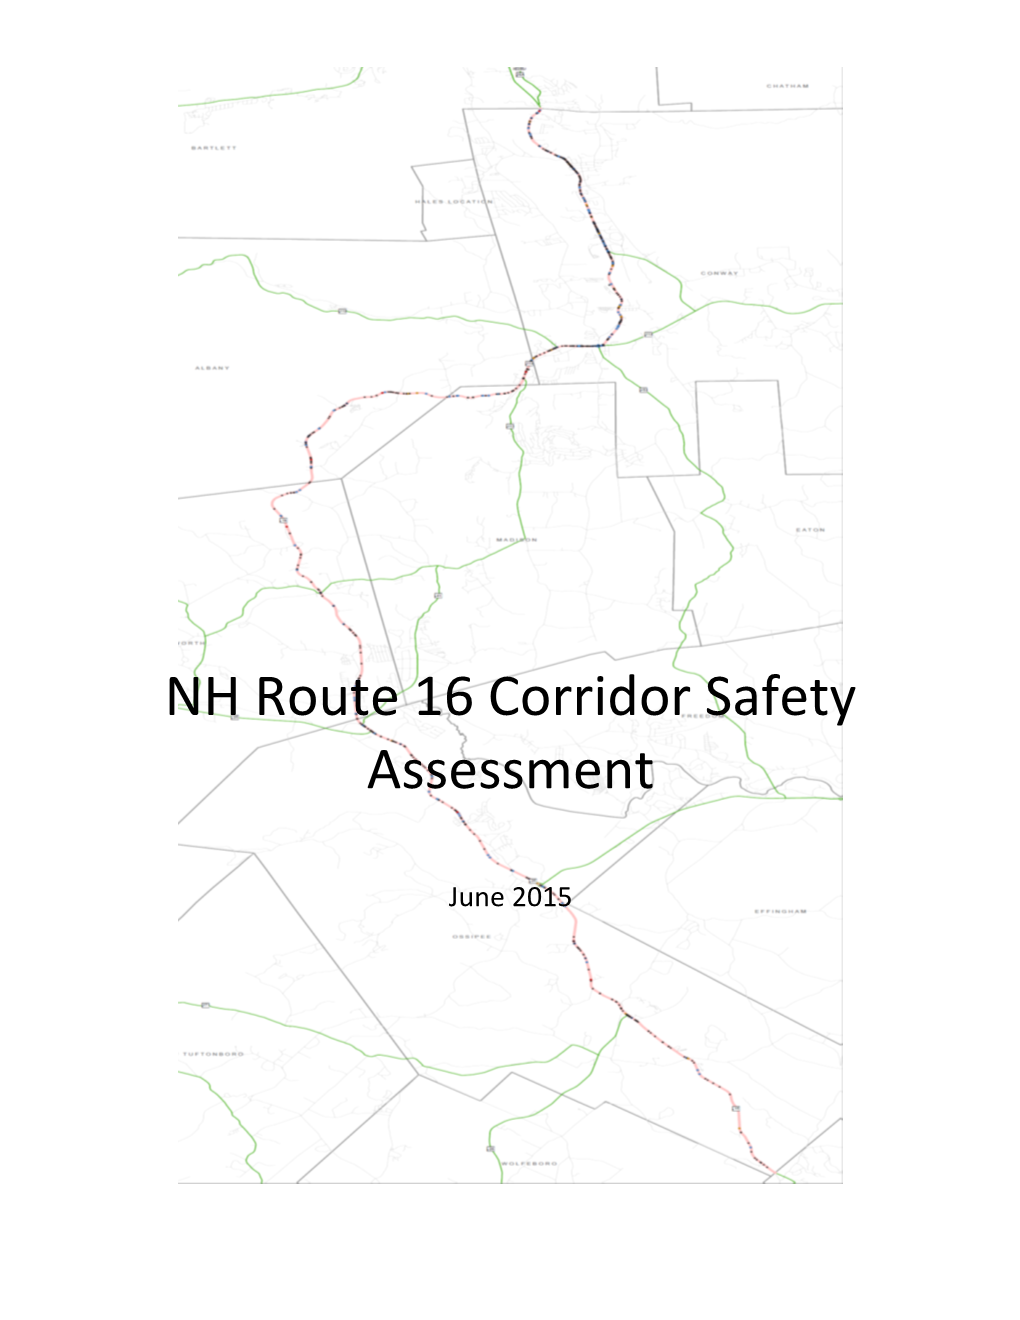 NH Route 16 Corridor Safety Assessment